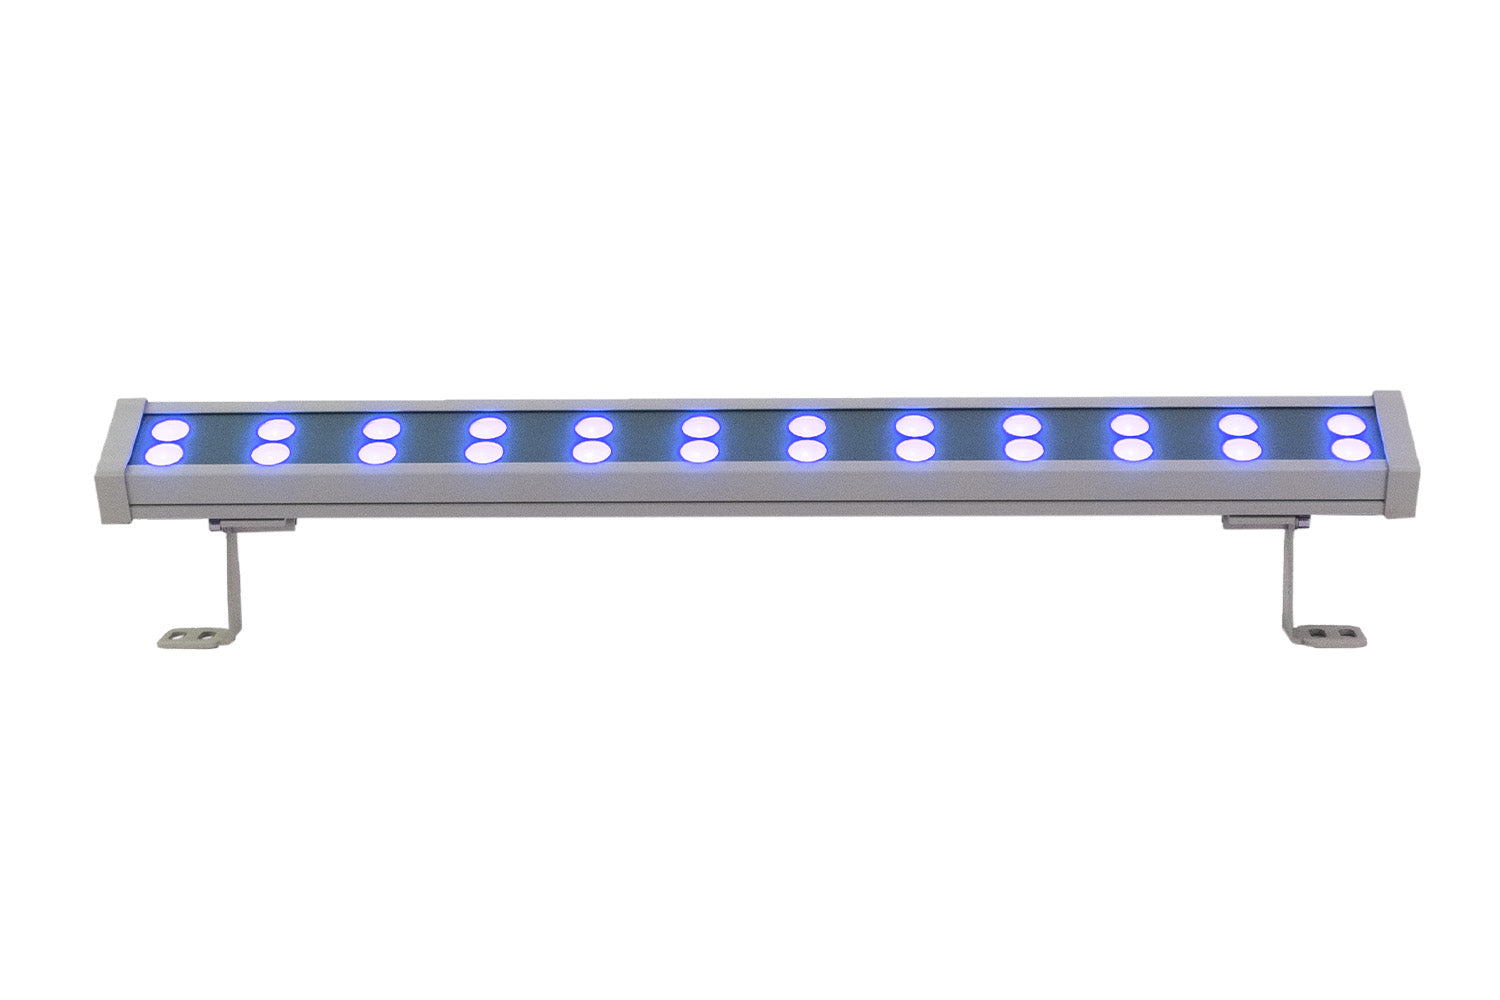 IPBARCRGBW - RGBW IP Rated LED Bar